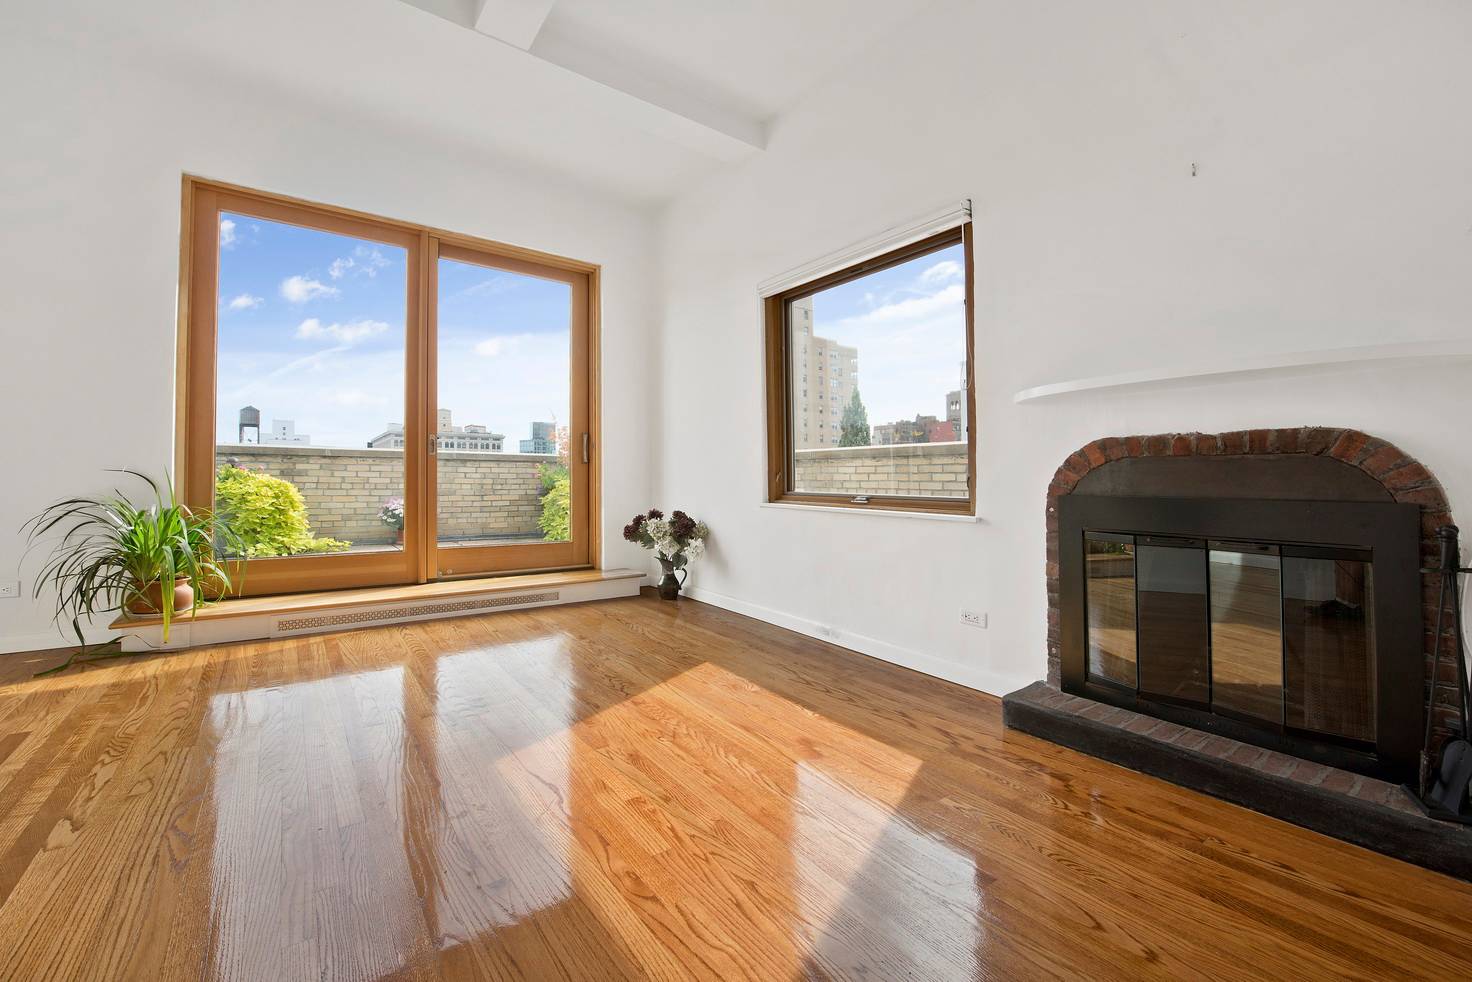 SOUTHEAST CORNER TWO BED PH WITH WRAP TERRACE AND FIREPLACE AT 25 FIFTH AVENUE!